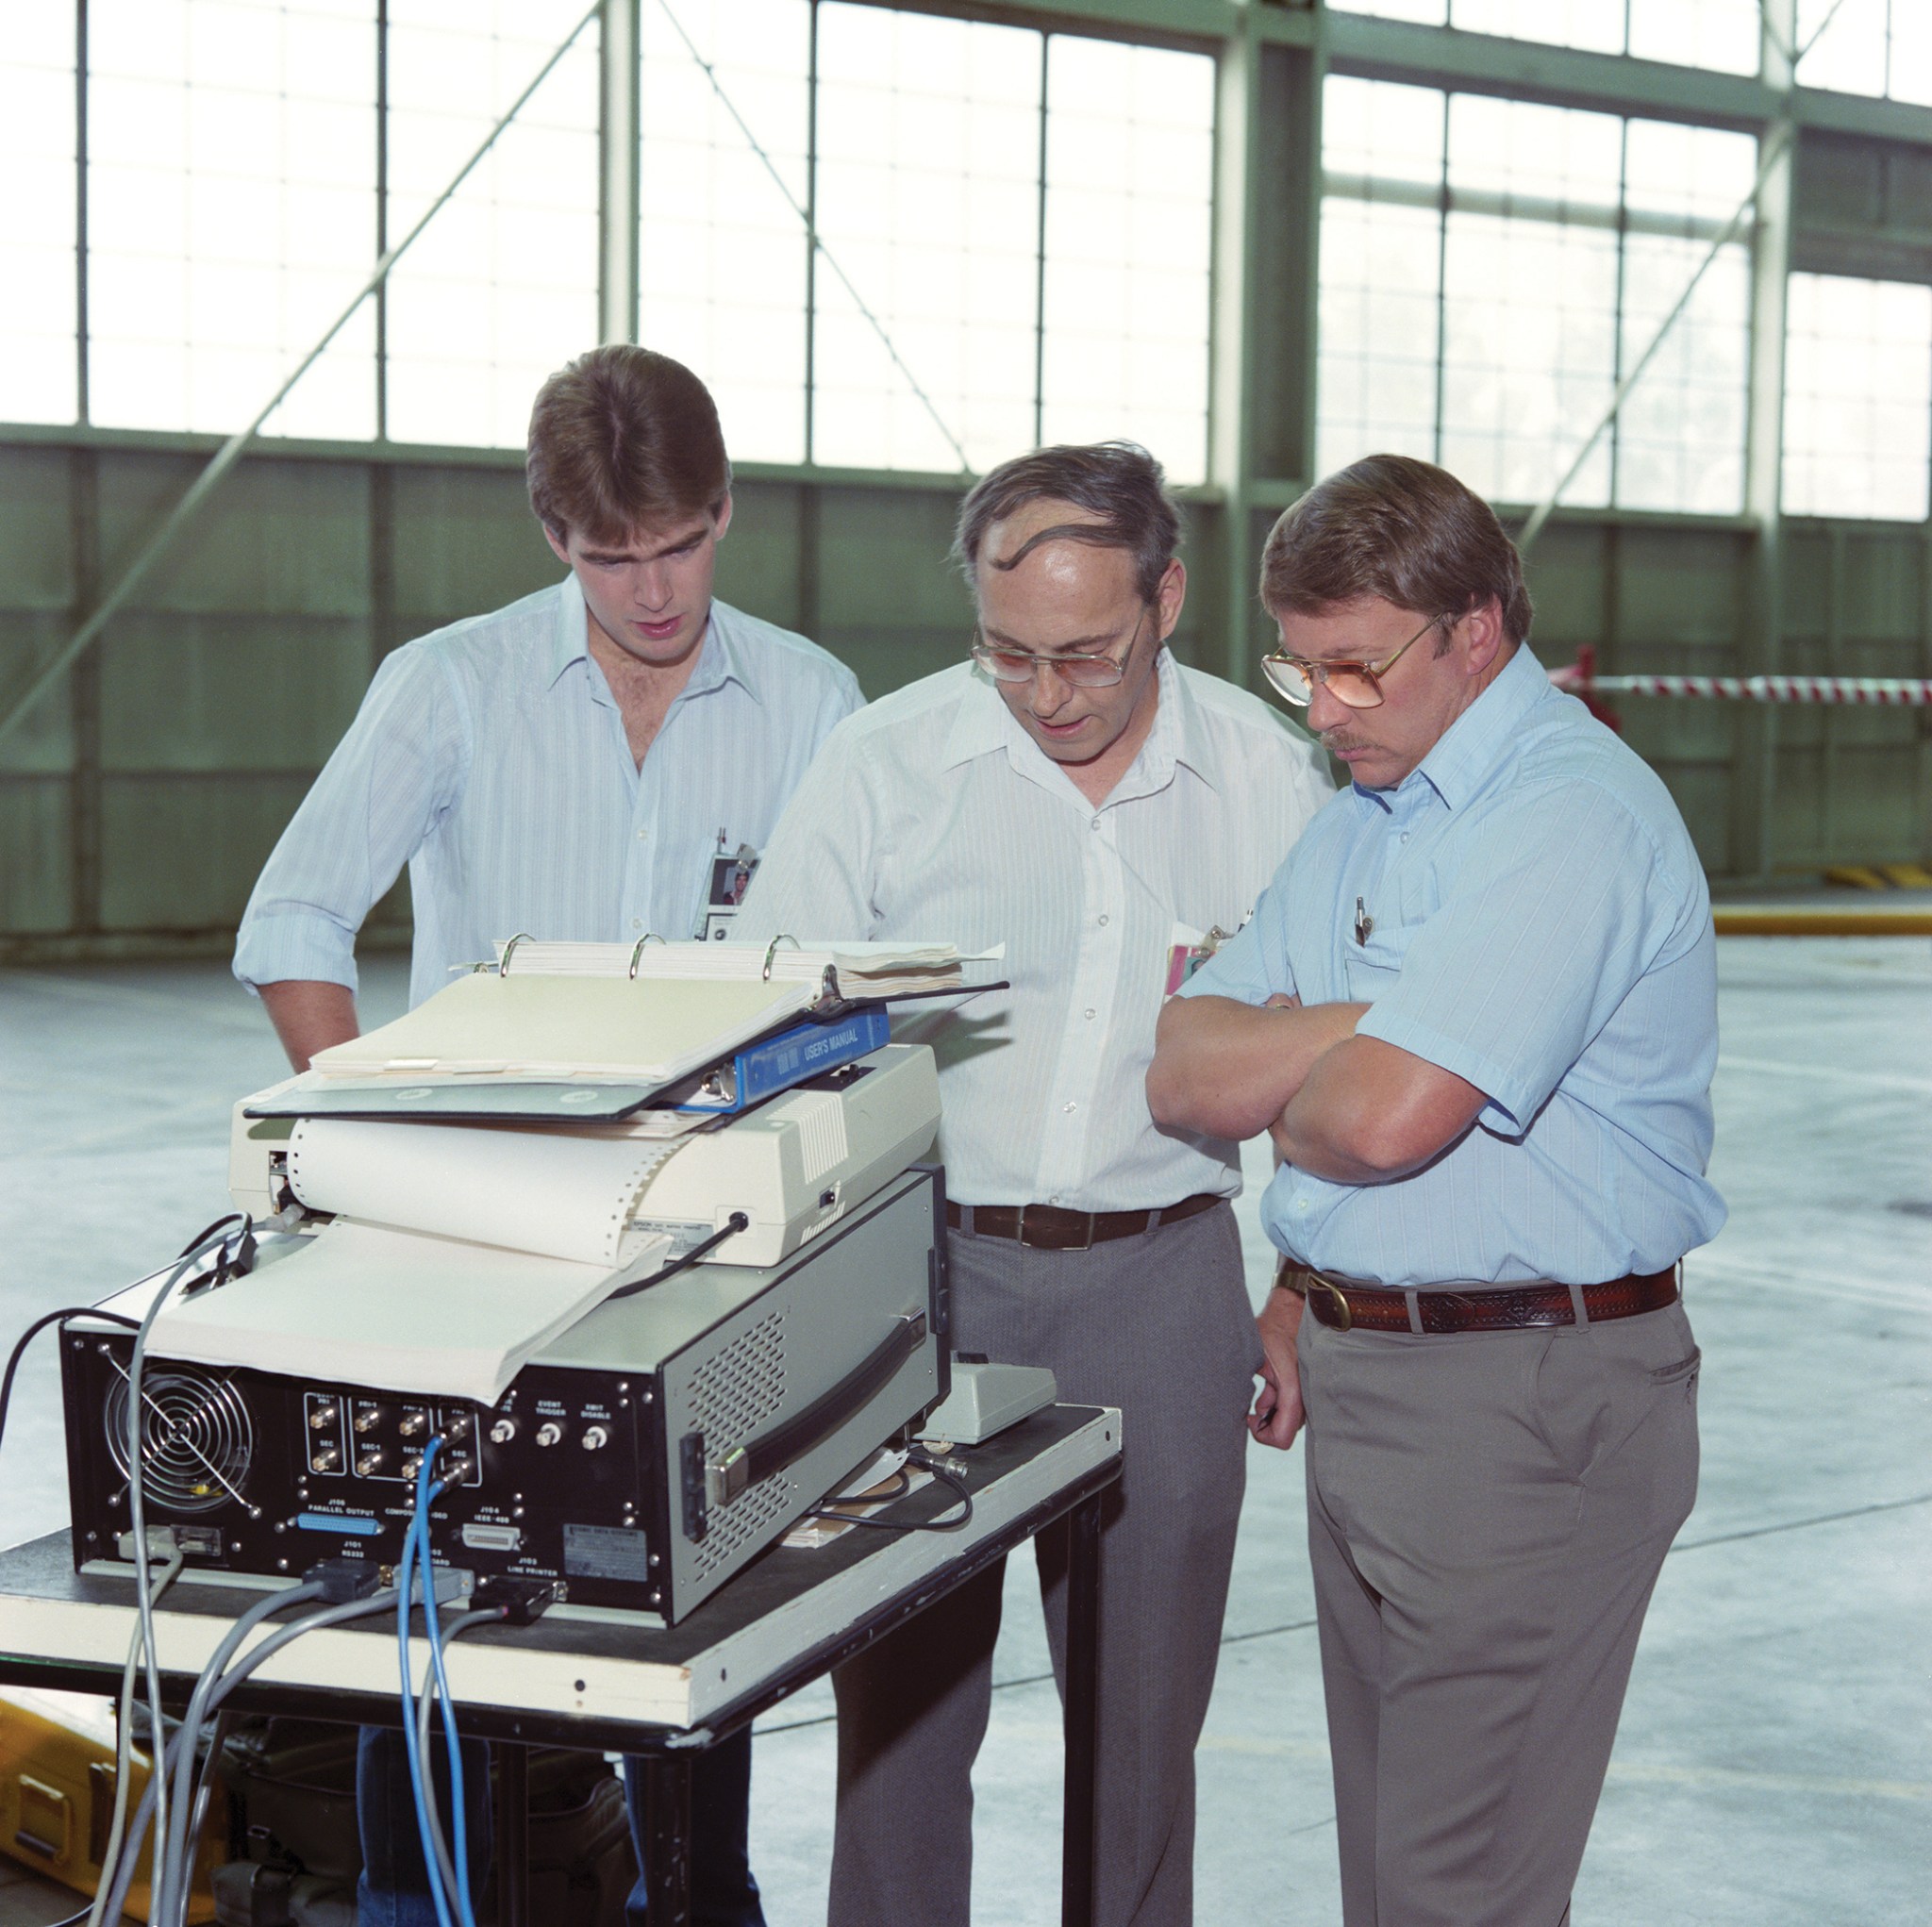 From left, Brad Flick, Dick Simon, and Jerry Henry analyze the aircraft data bus.